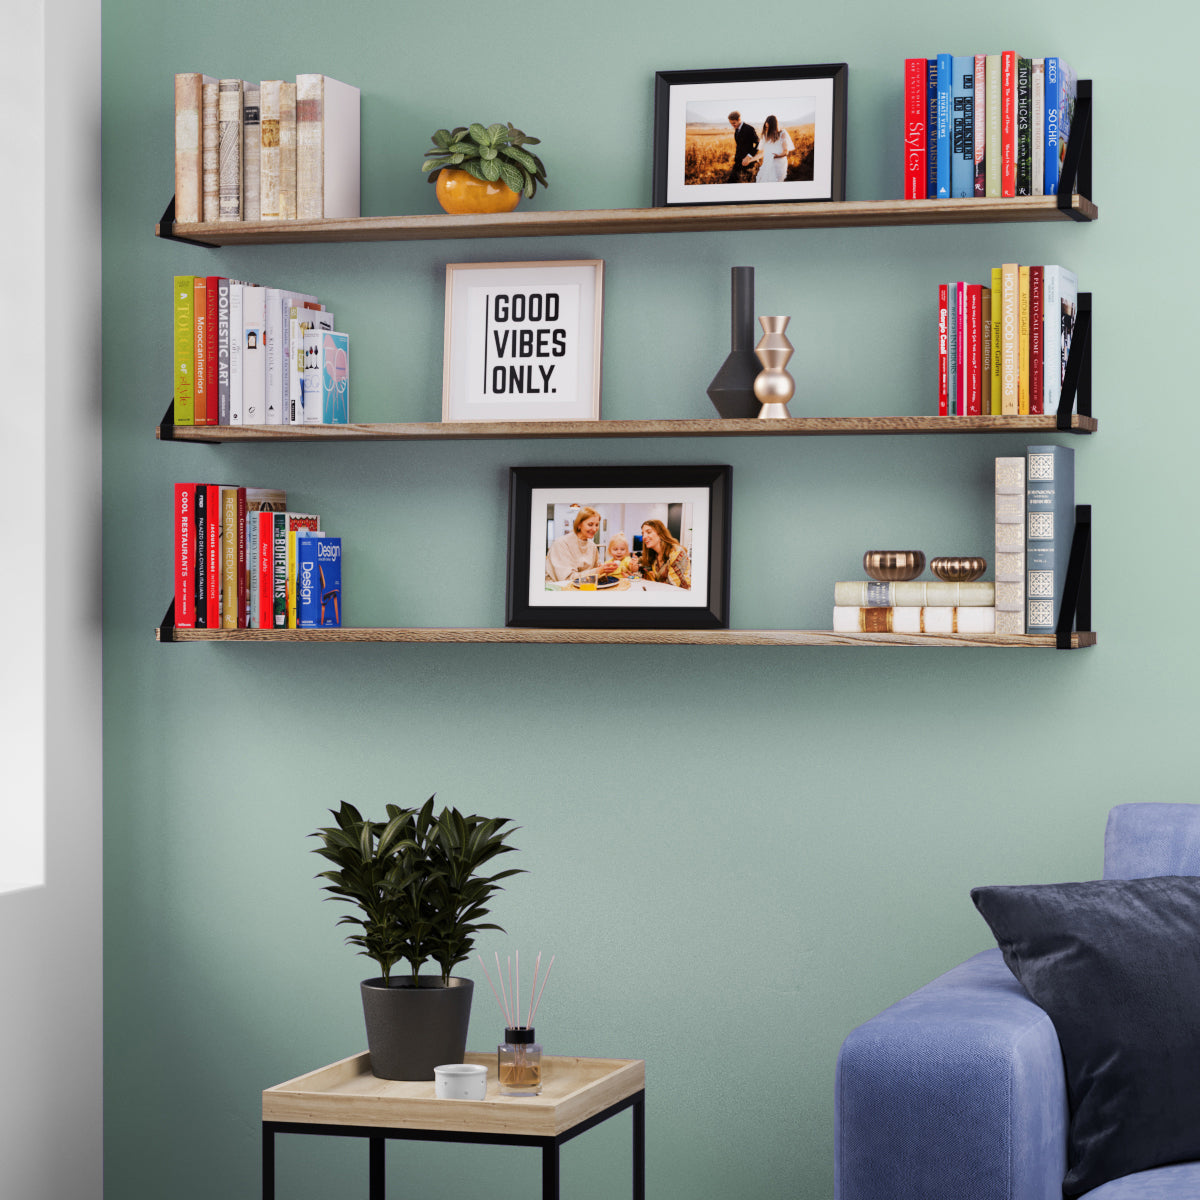 Cozy living room decor with multiple display shelves filled with books, framed pictures, and decorative items.